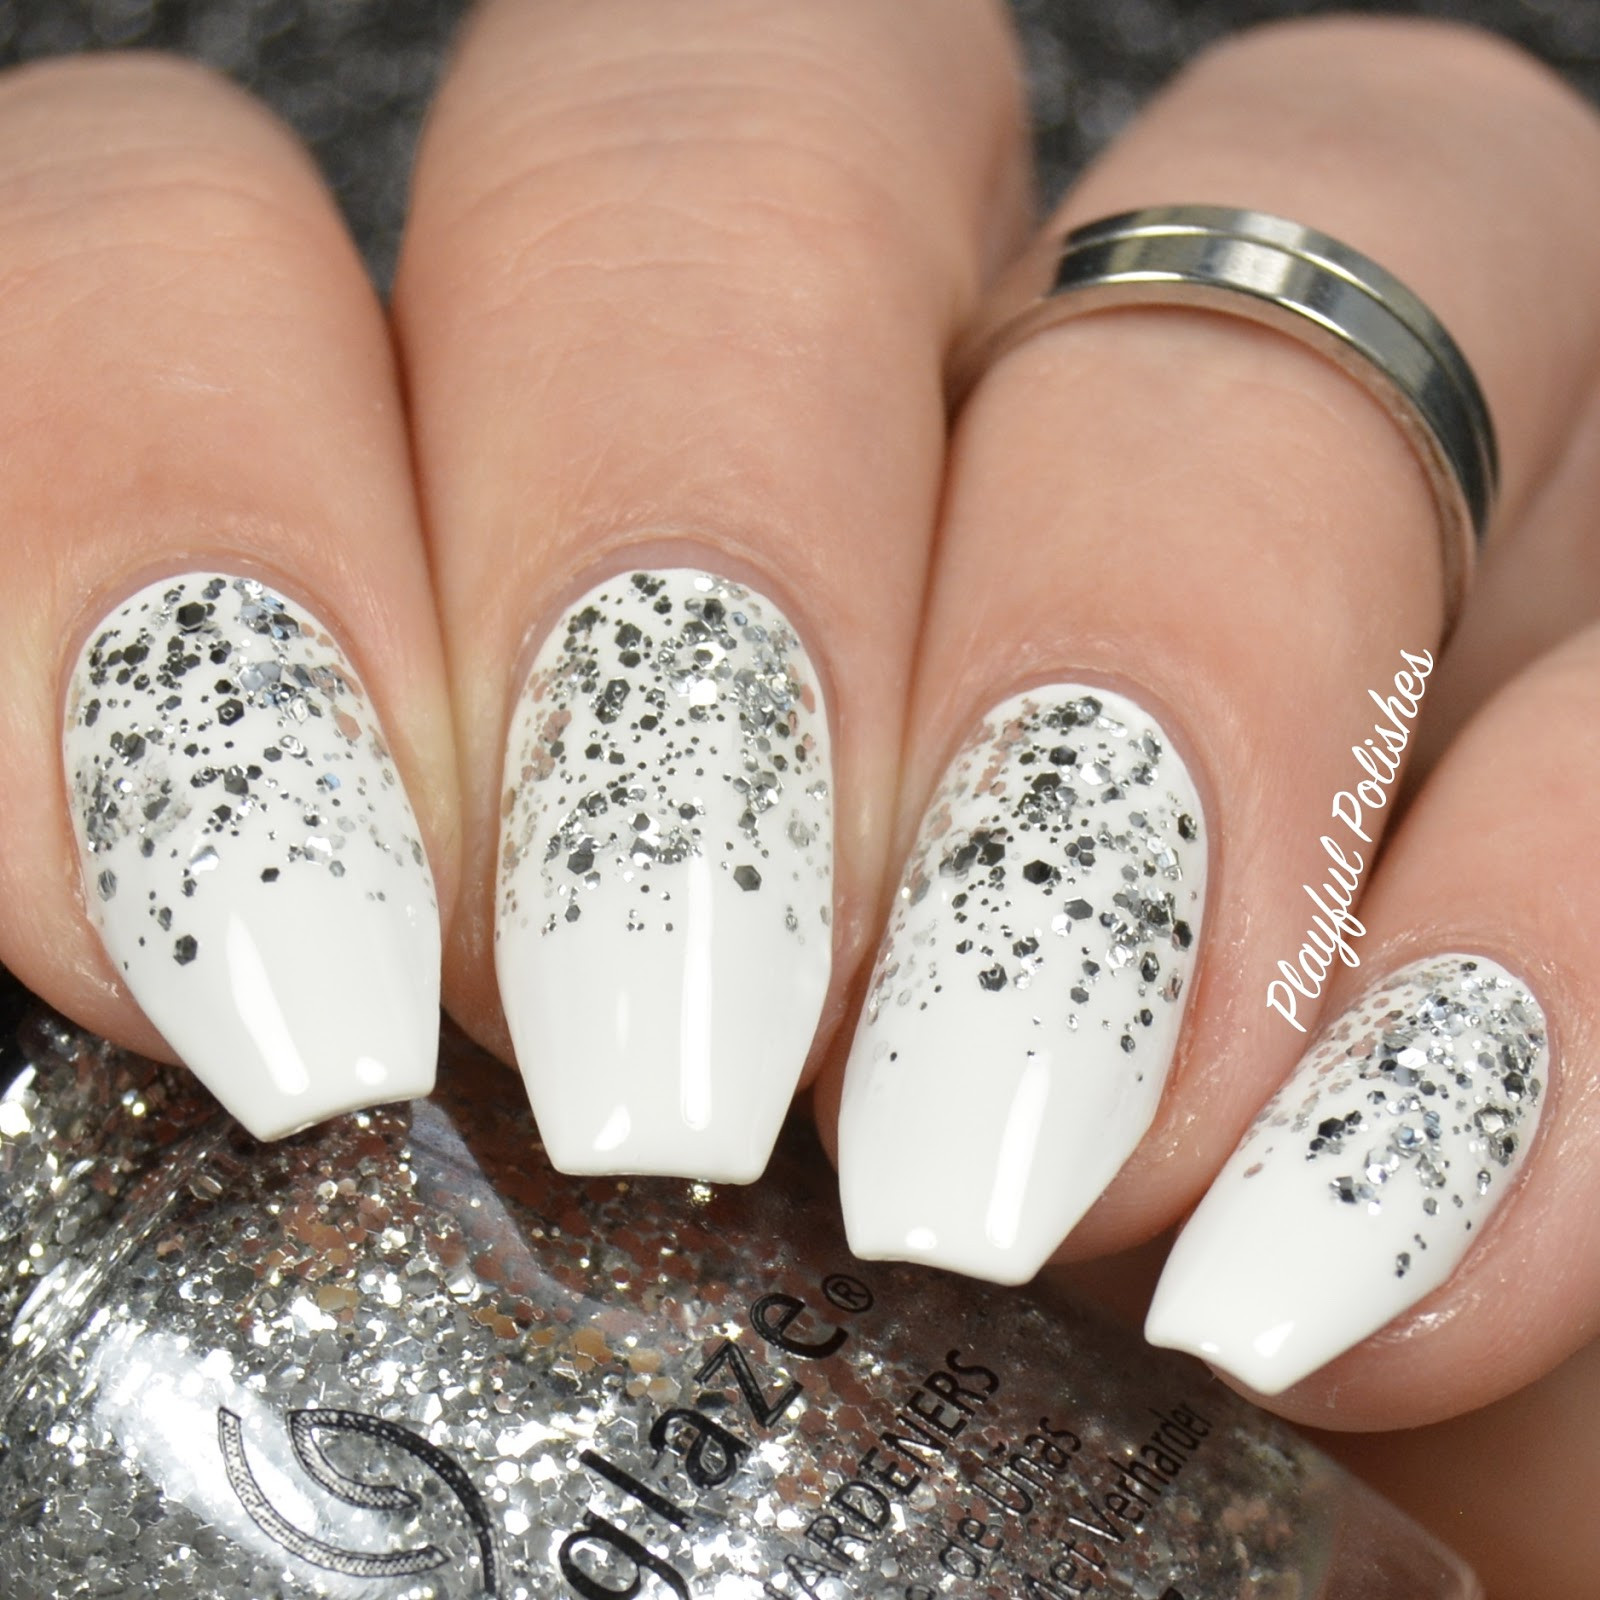 New Years Nail Designs
 Playful Polishes 3 SIMPLE & ELEGANT NEW YEARS NAIL DESIGNS